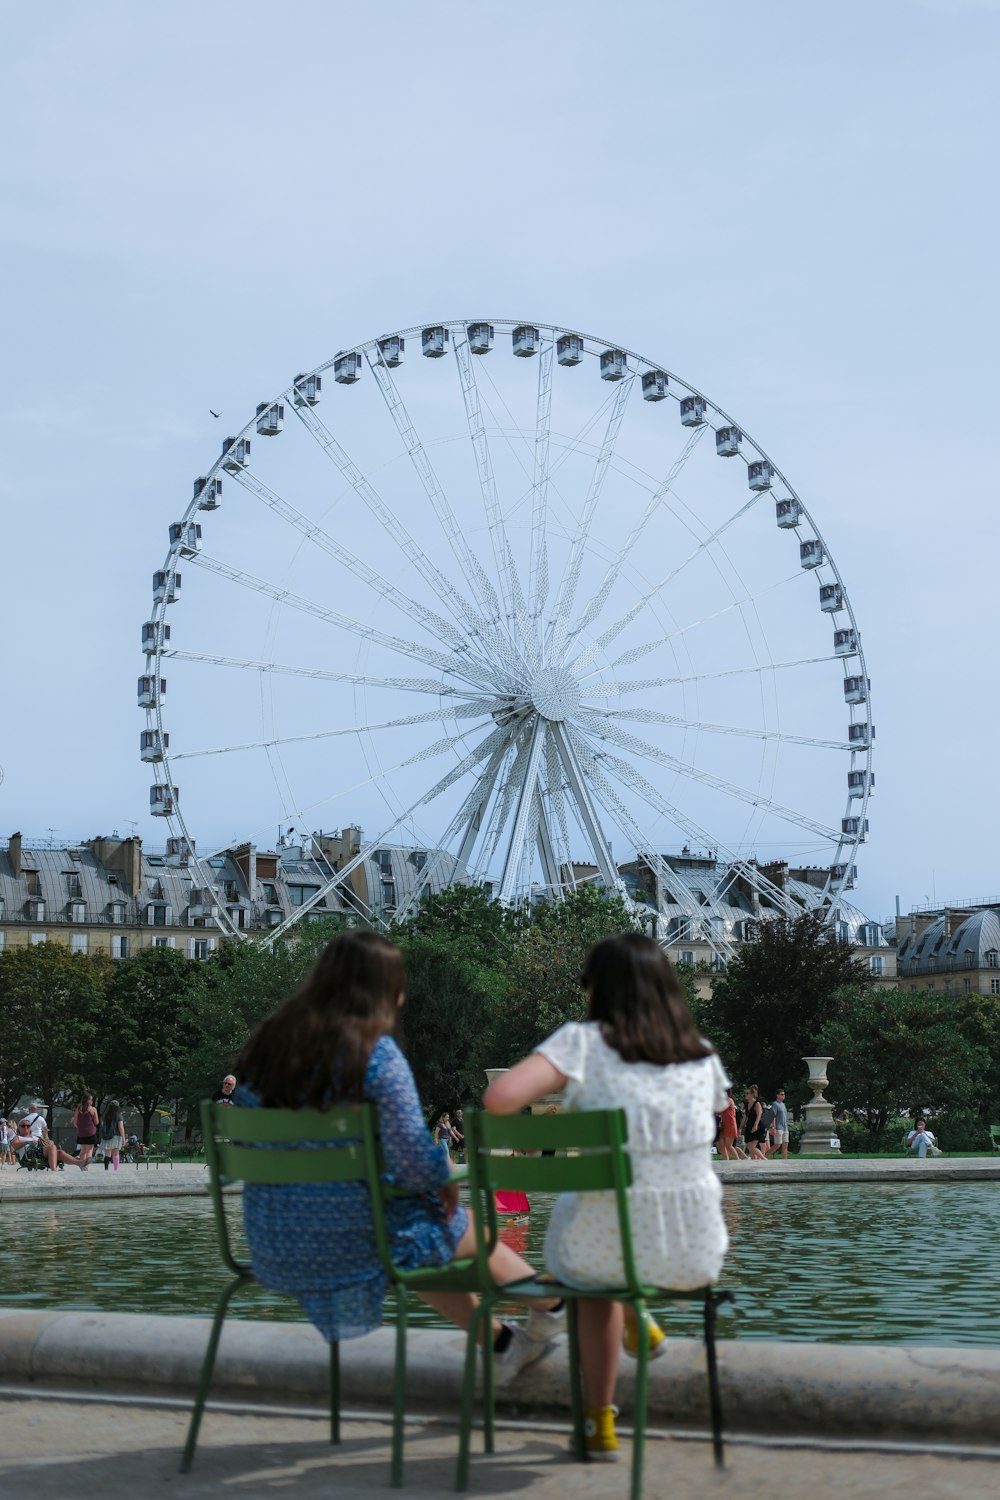 two little girls sitting in chairs in front of a ferris wheel